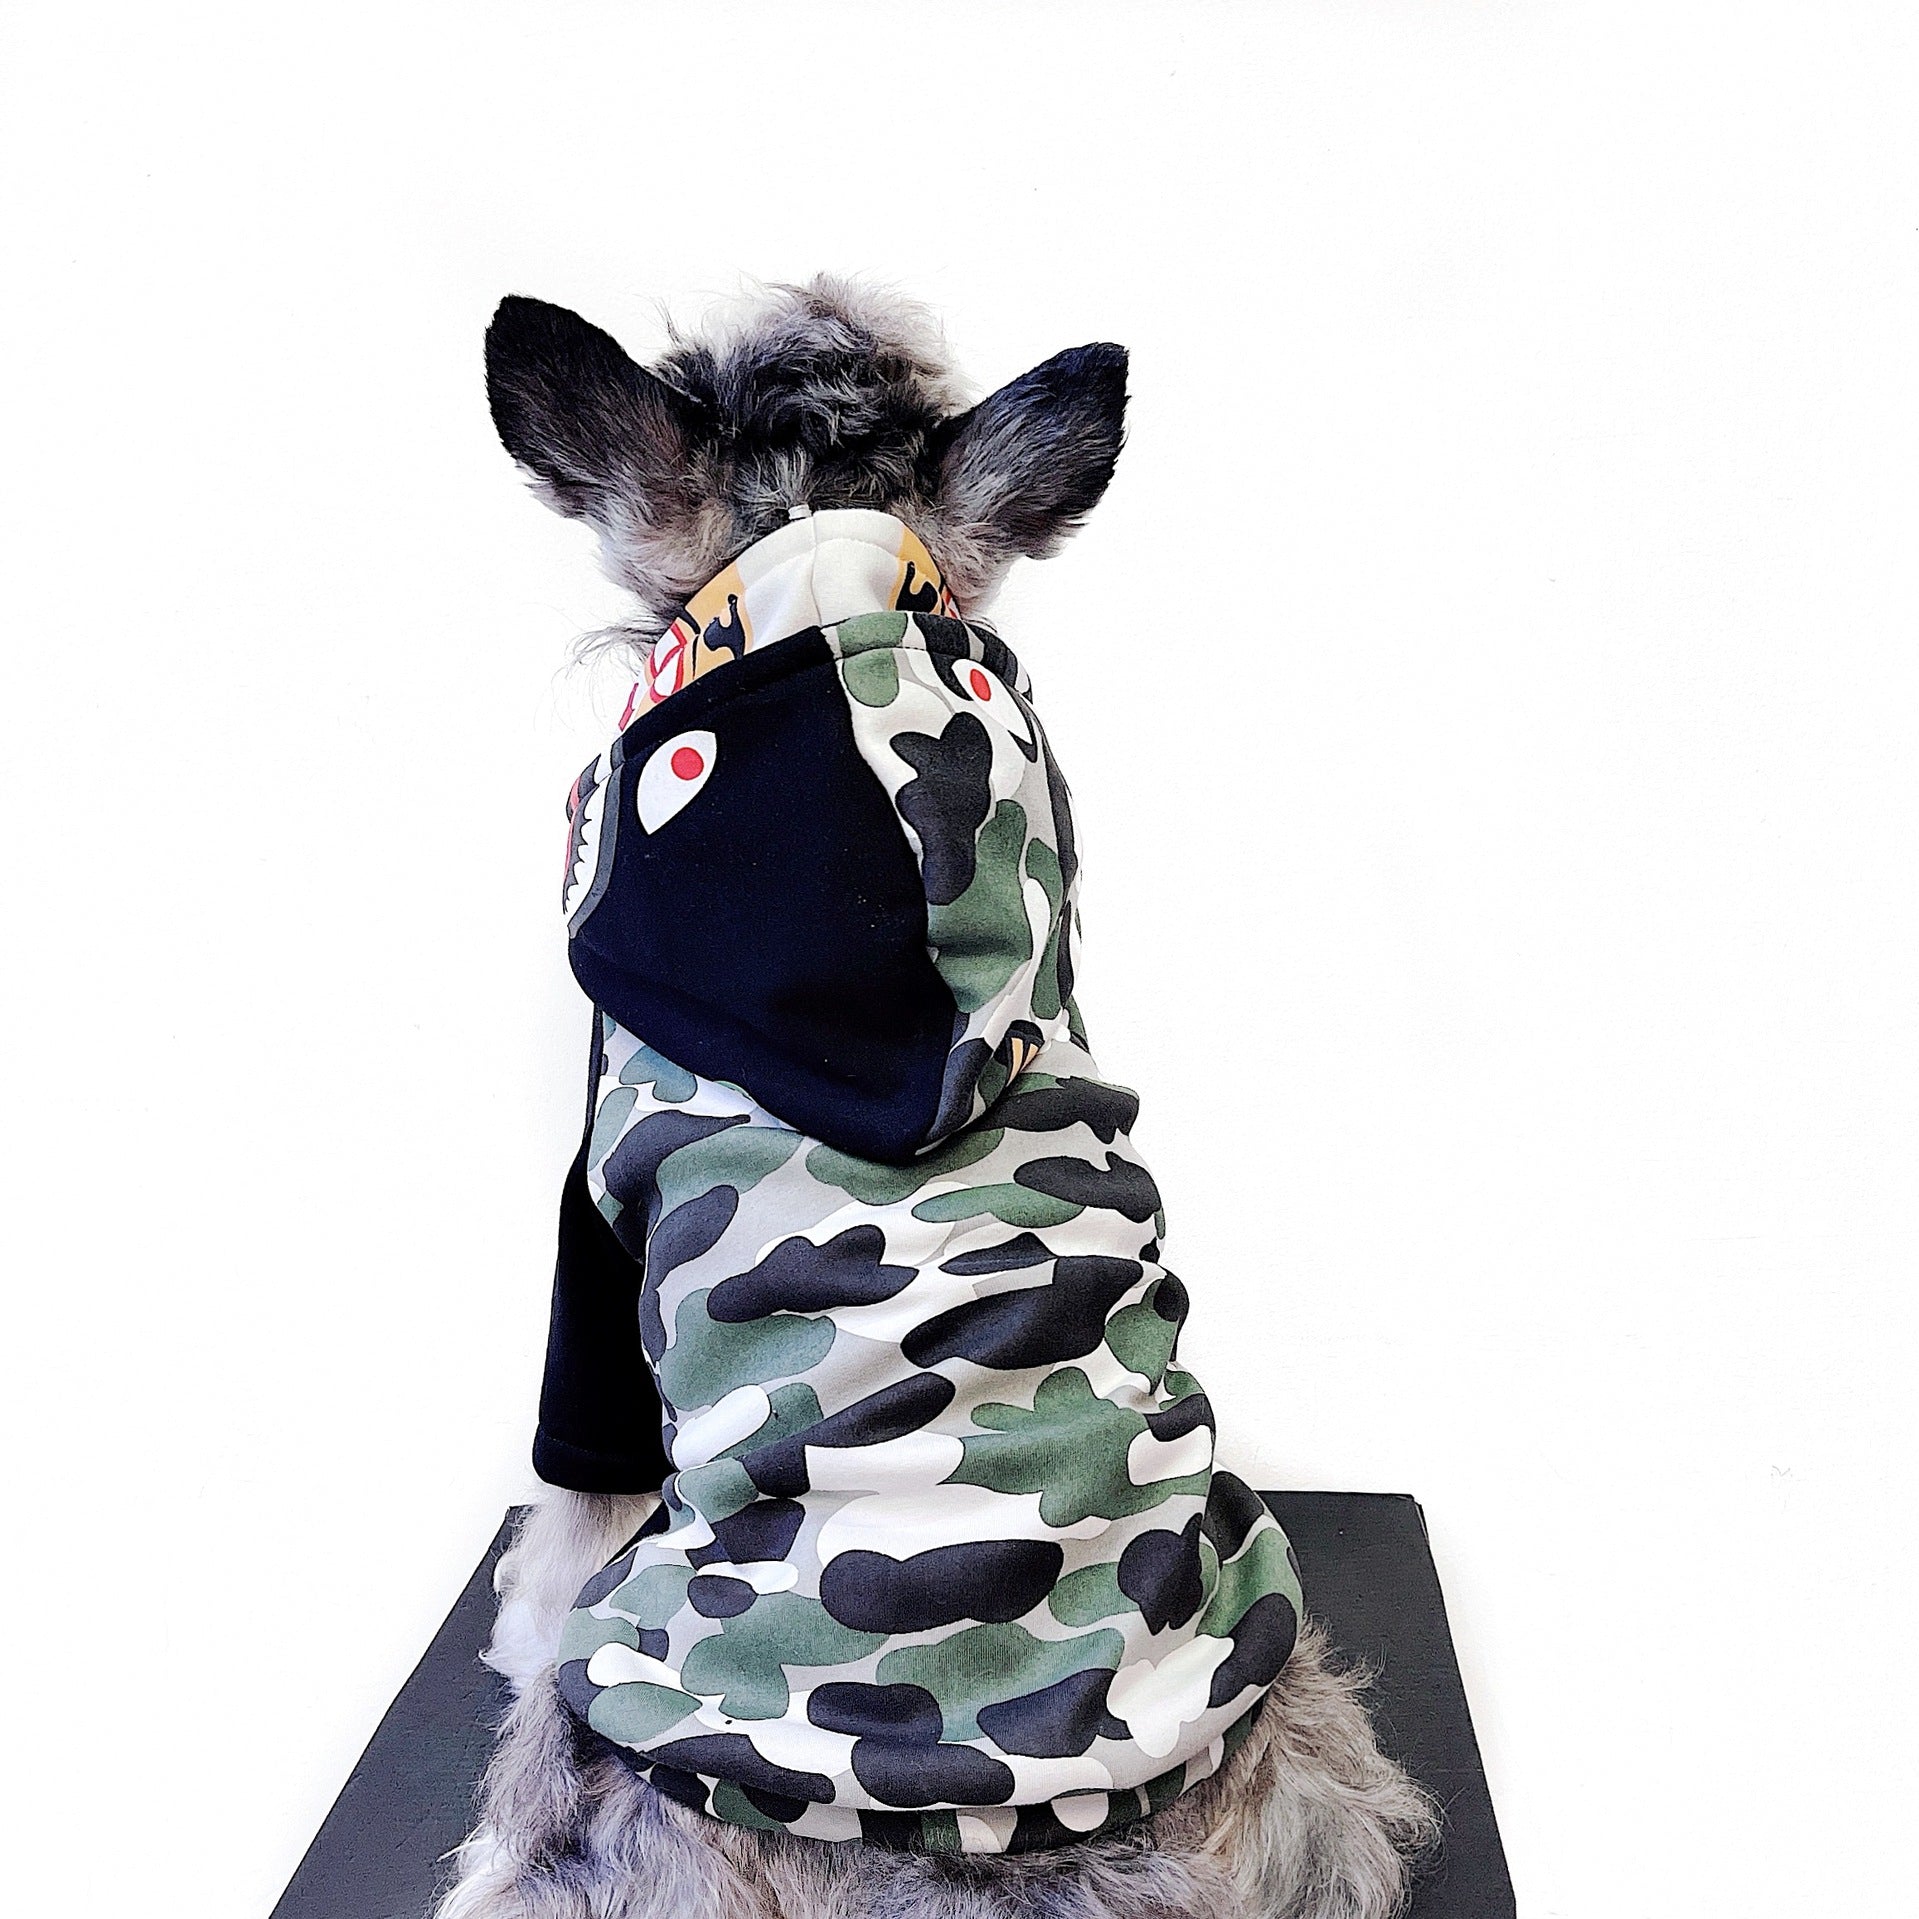 Stylish Camouflage Dog Sweater - Blend in with nature while staying warm in this hoodie